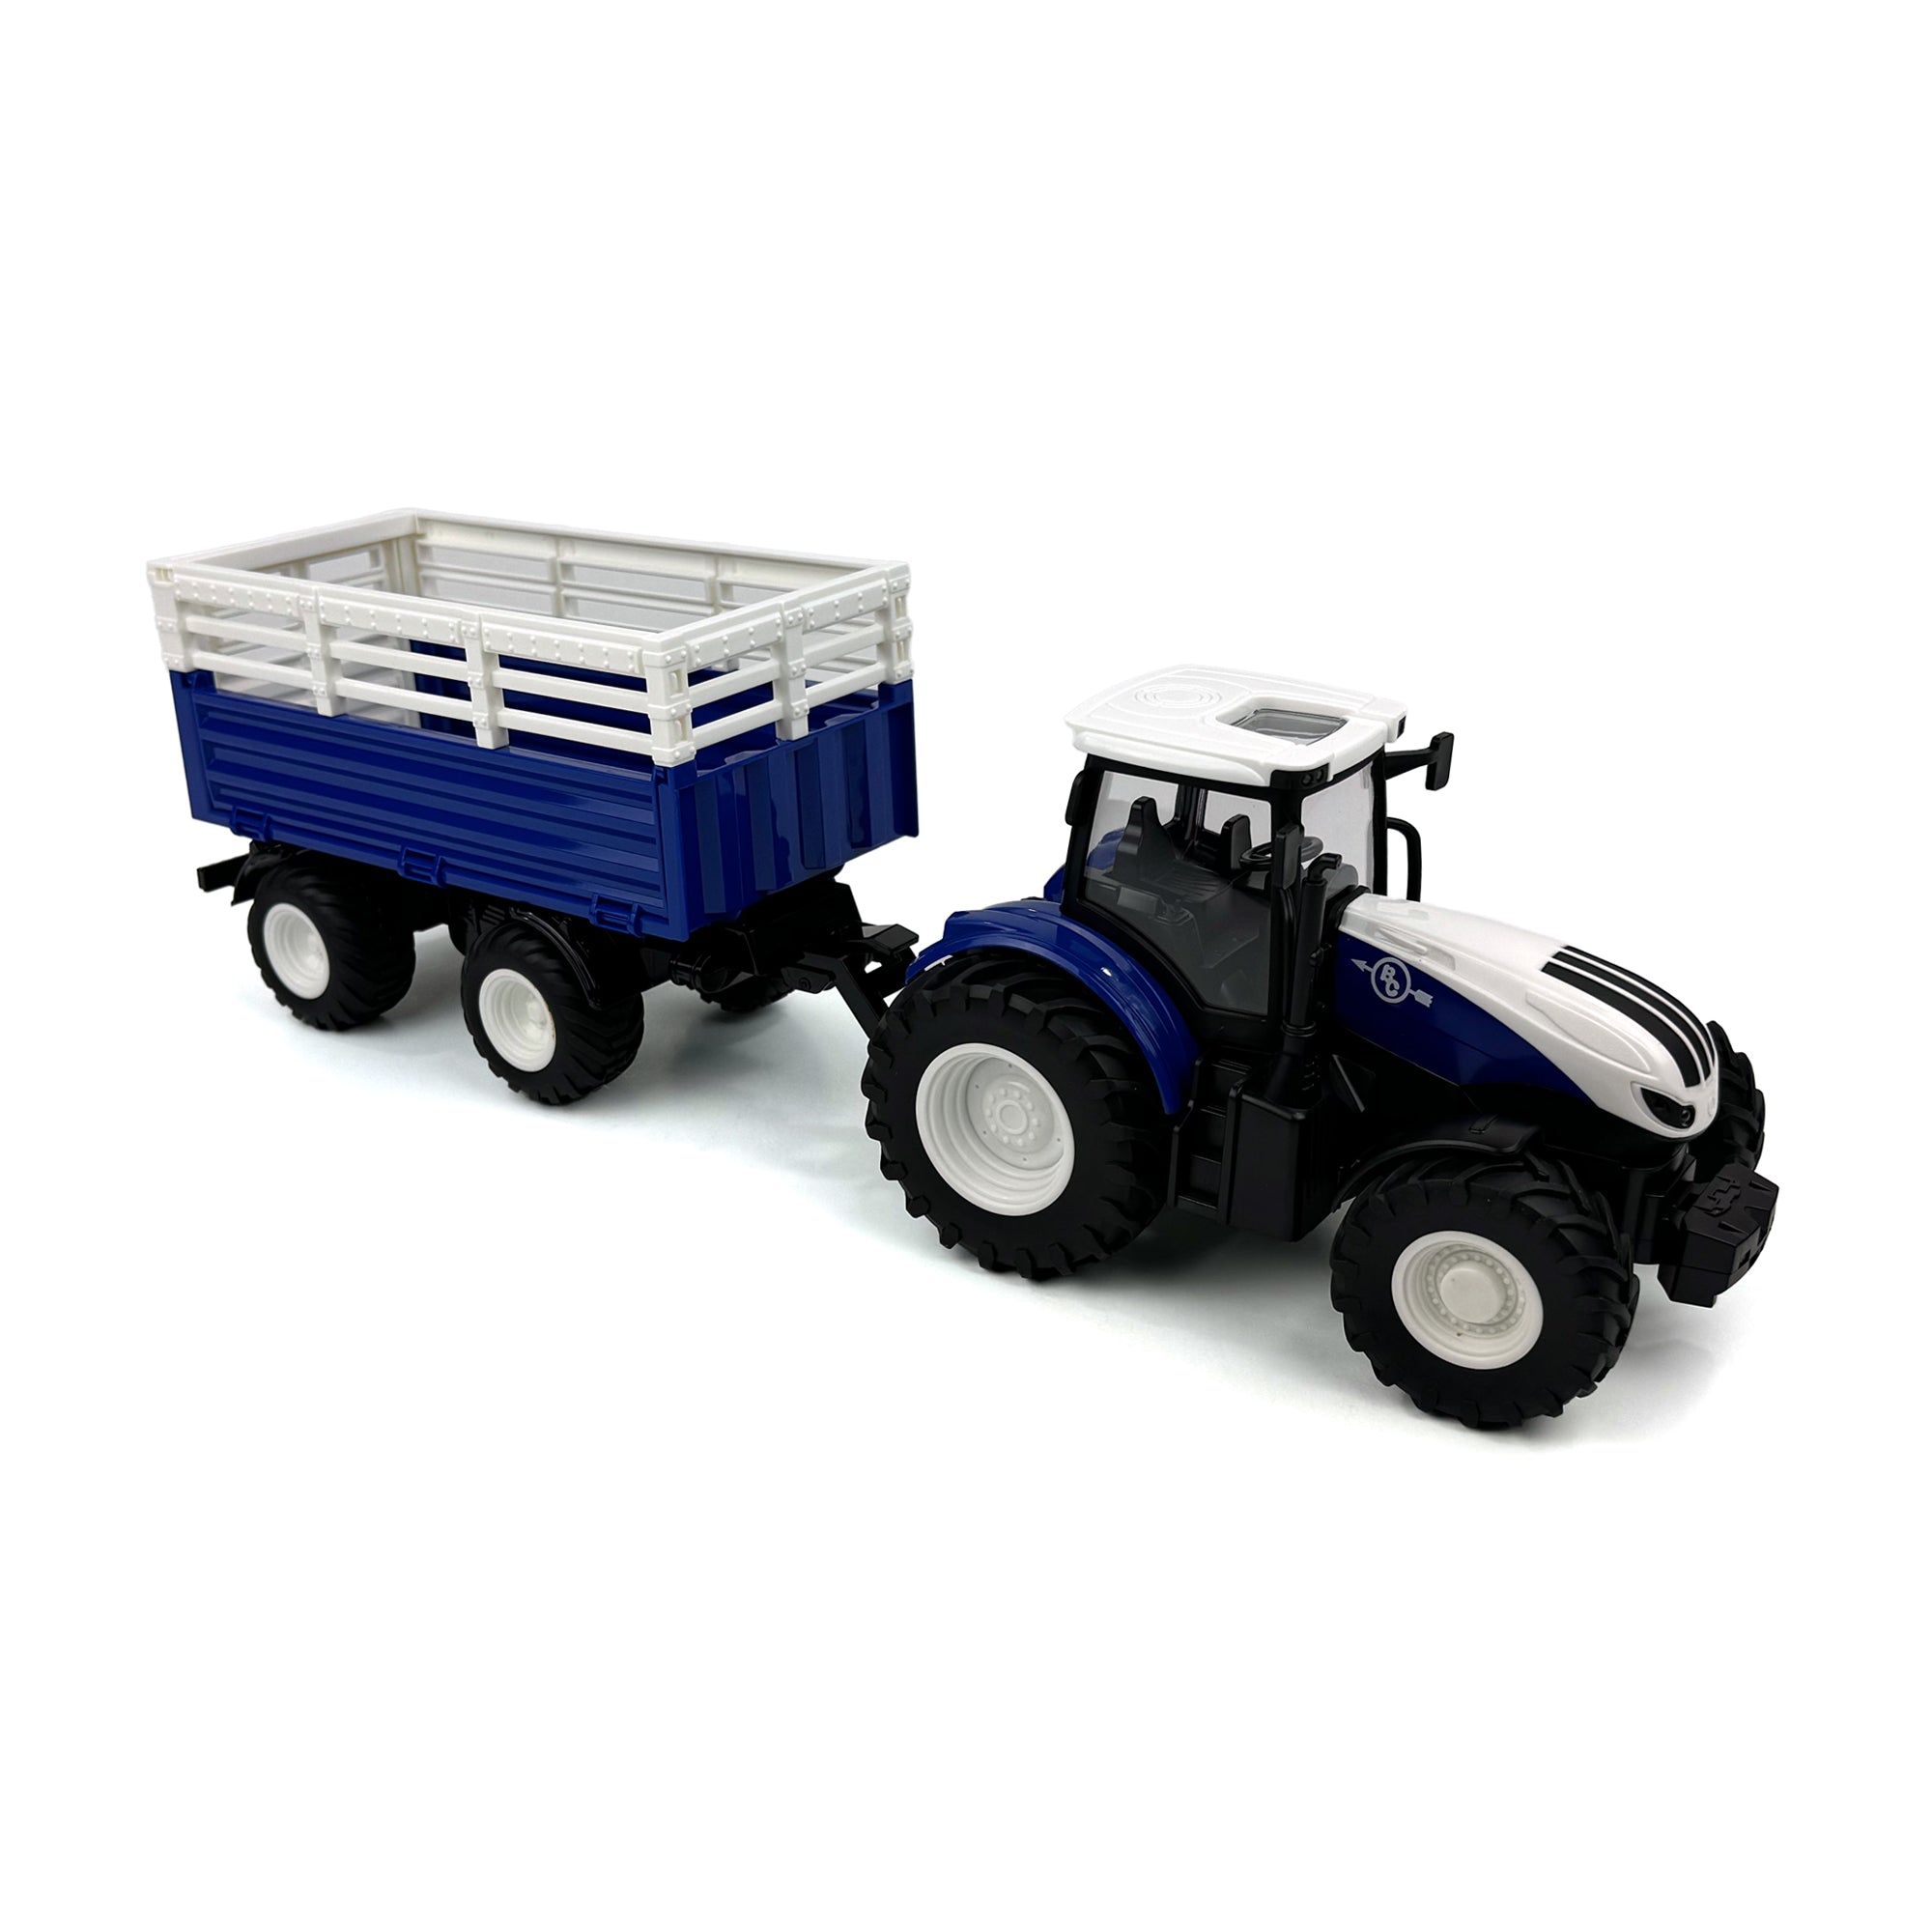 1:24 Scale R/C Tractor & Trailer Combo